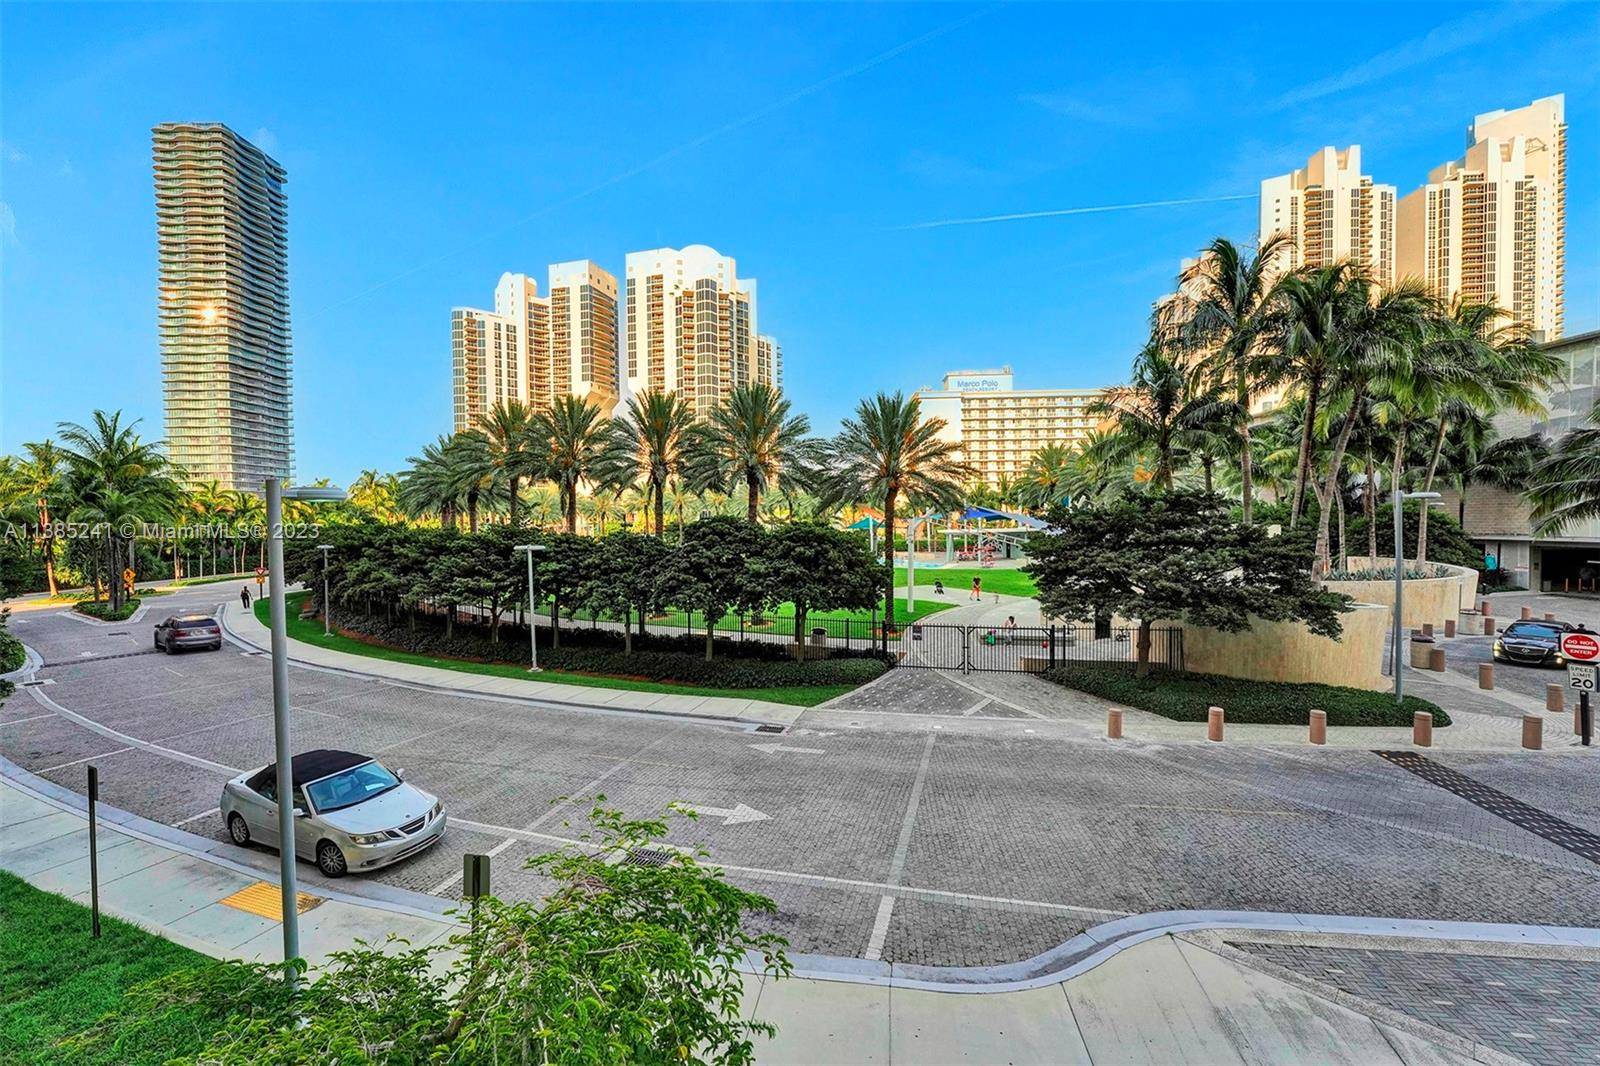 BEAUTIFUL 1 BEDROOM APARTMENT WITH EXTRA LARGE BALCONY FACING HERITAGE PARK, LOCATED ACROSS THE STREET FROM THE BEACH.